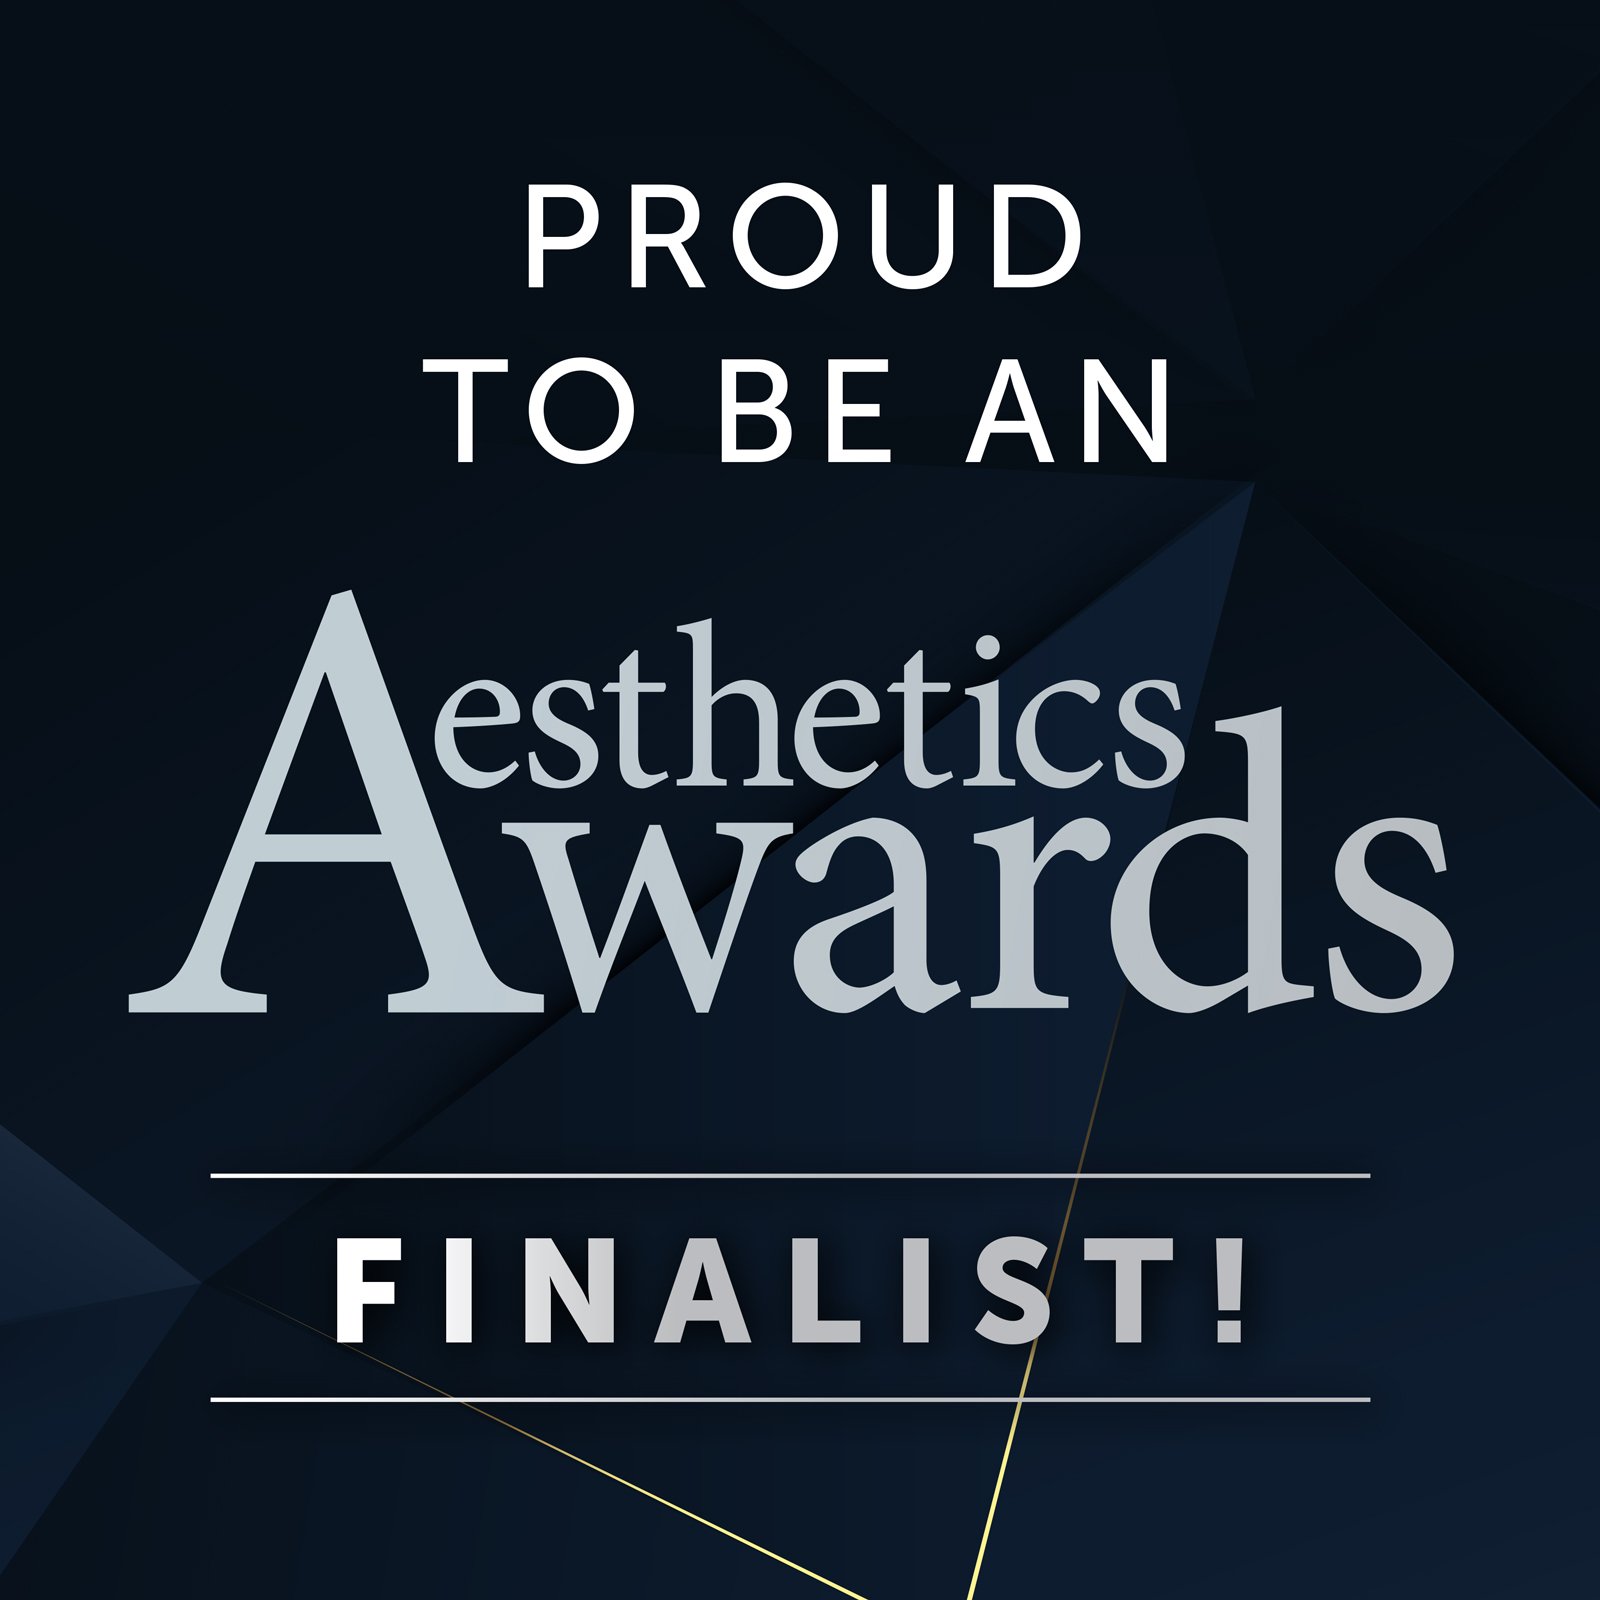 We Are Finalists At The Aesthetics Awards 2022!